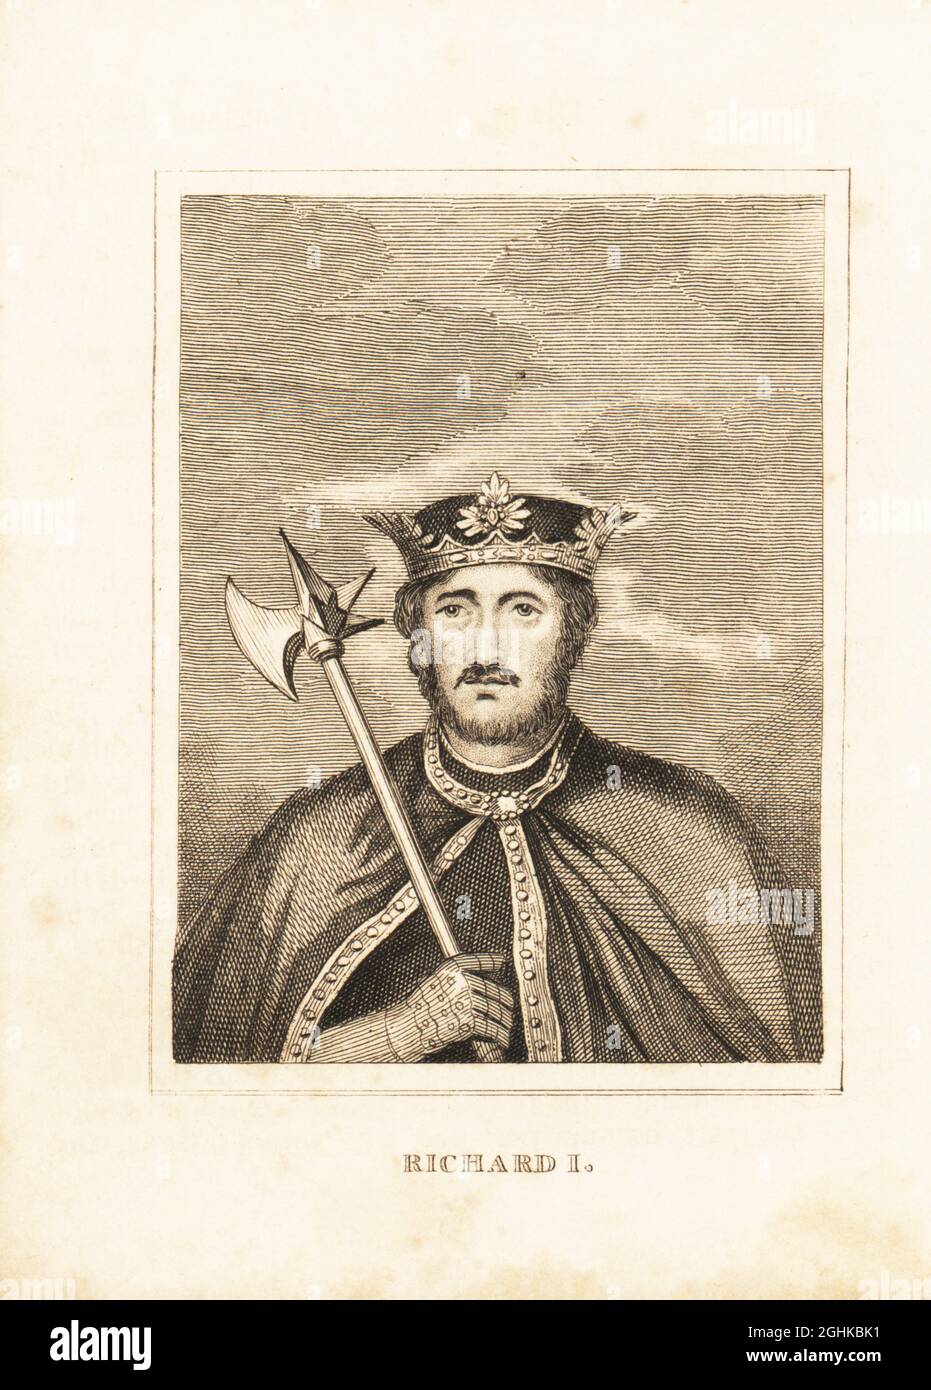 Portrait of King Richard I of England in crown, armour and cape, holding battle ax. Copperplate engraving from M. A. Jones’ History of England from Julius Caesar to George IV, G. Virtue, 26 Ivy Lane, London, 1836. Stock Photo